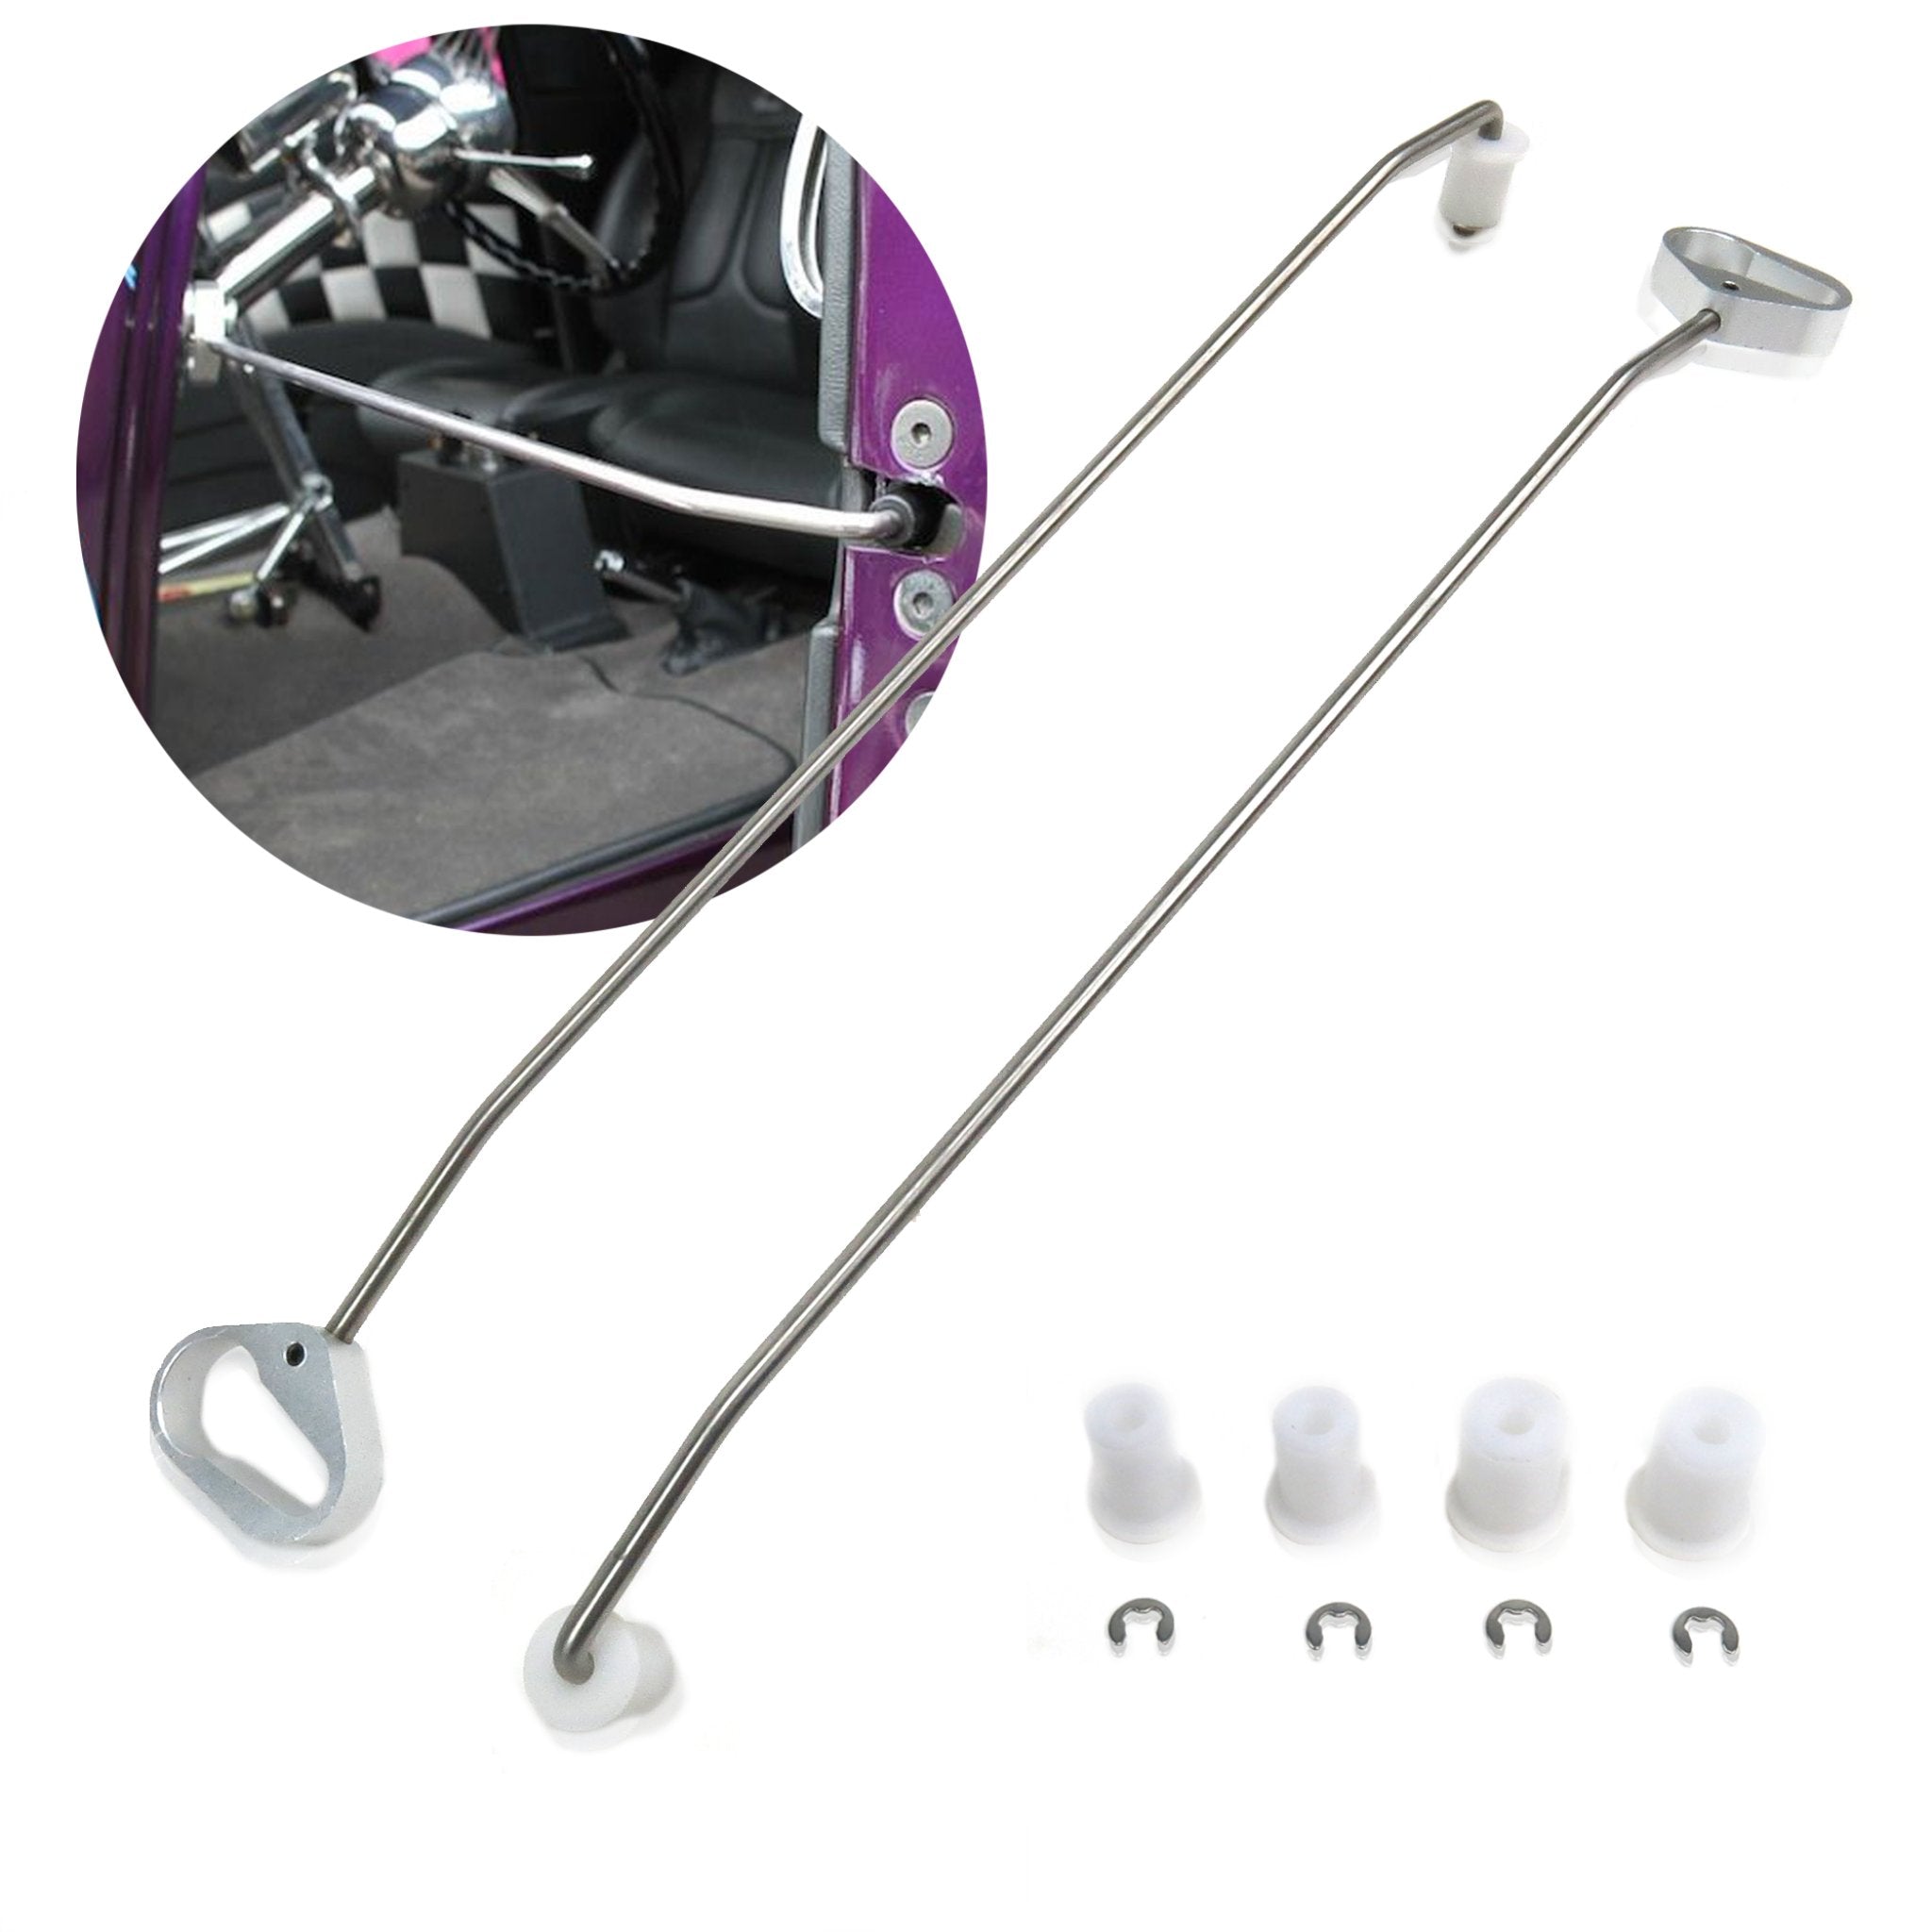 Stainless Steel Door Prop Open Rods Set Holds Latch for Shows Interior Display